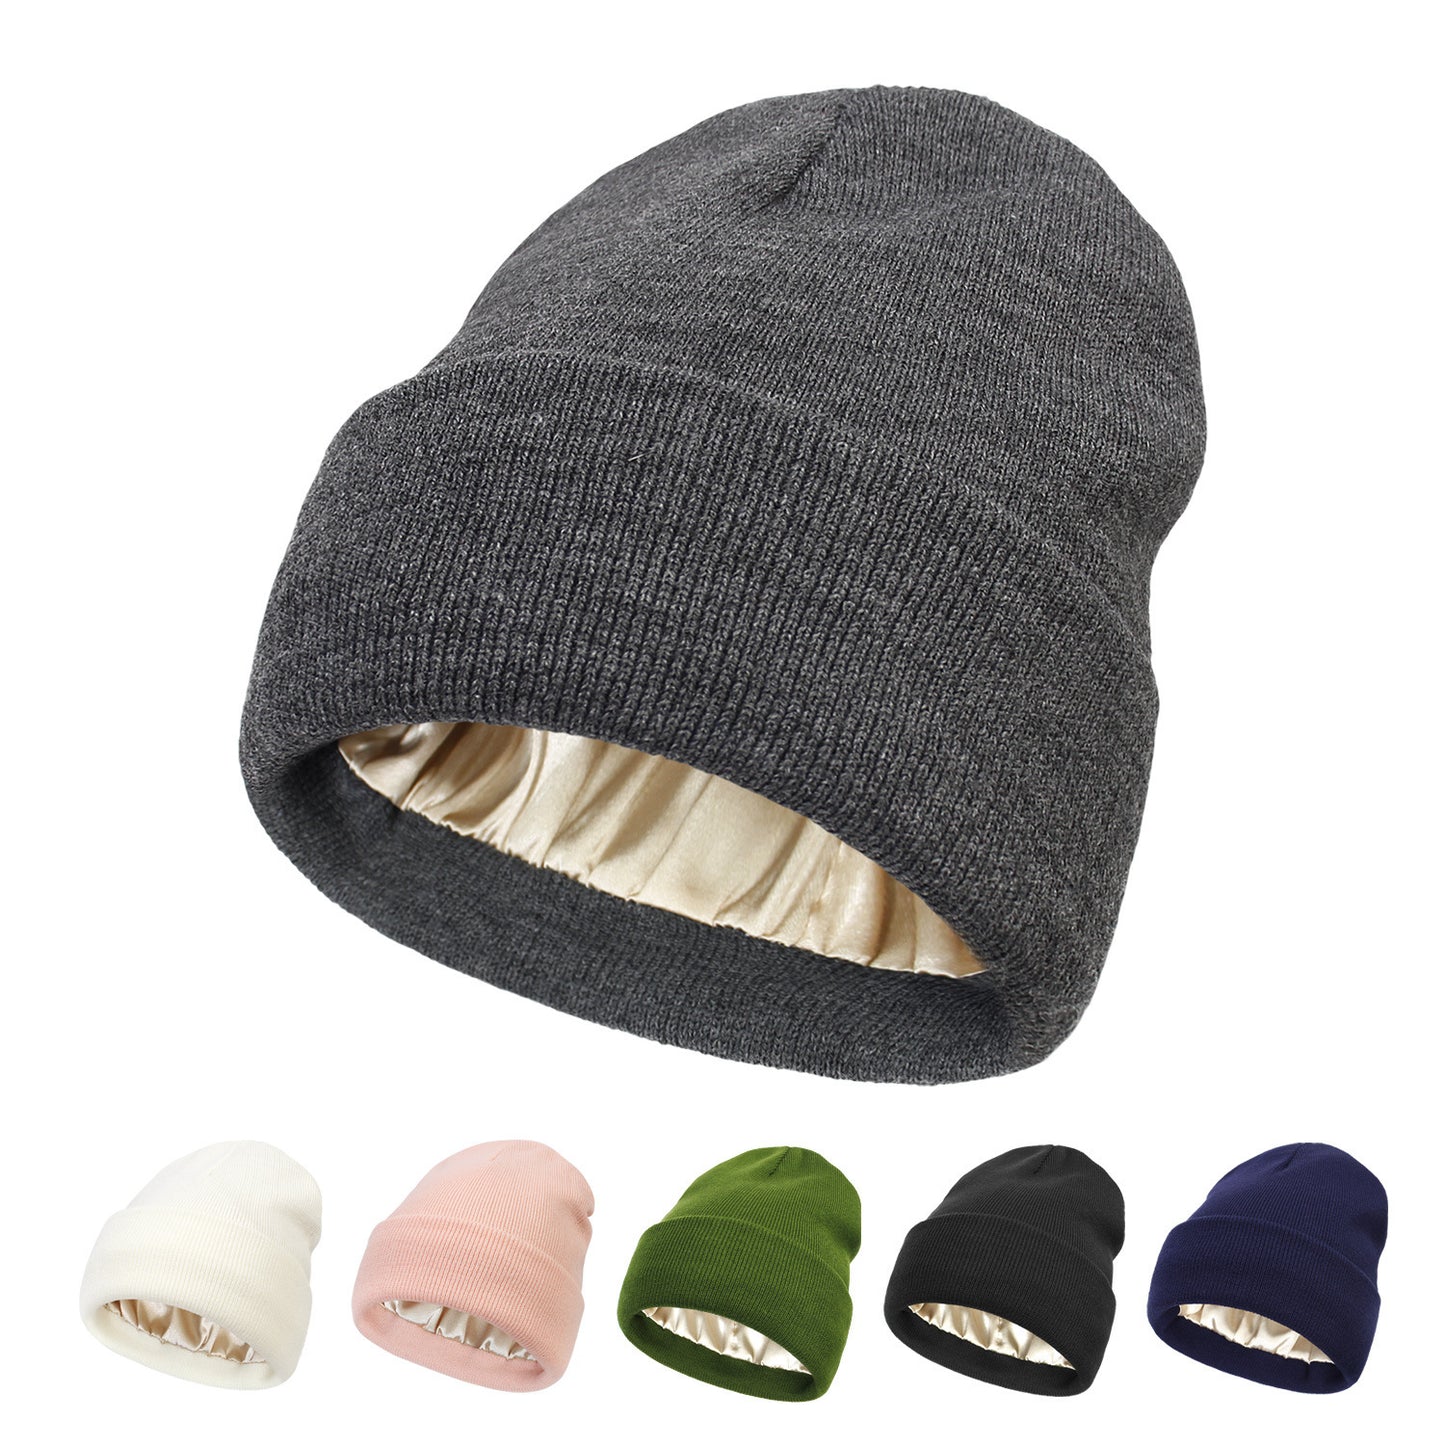 Pandaize Premium Dual-Layer Knit Hat with Satin Lining for Warmth